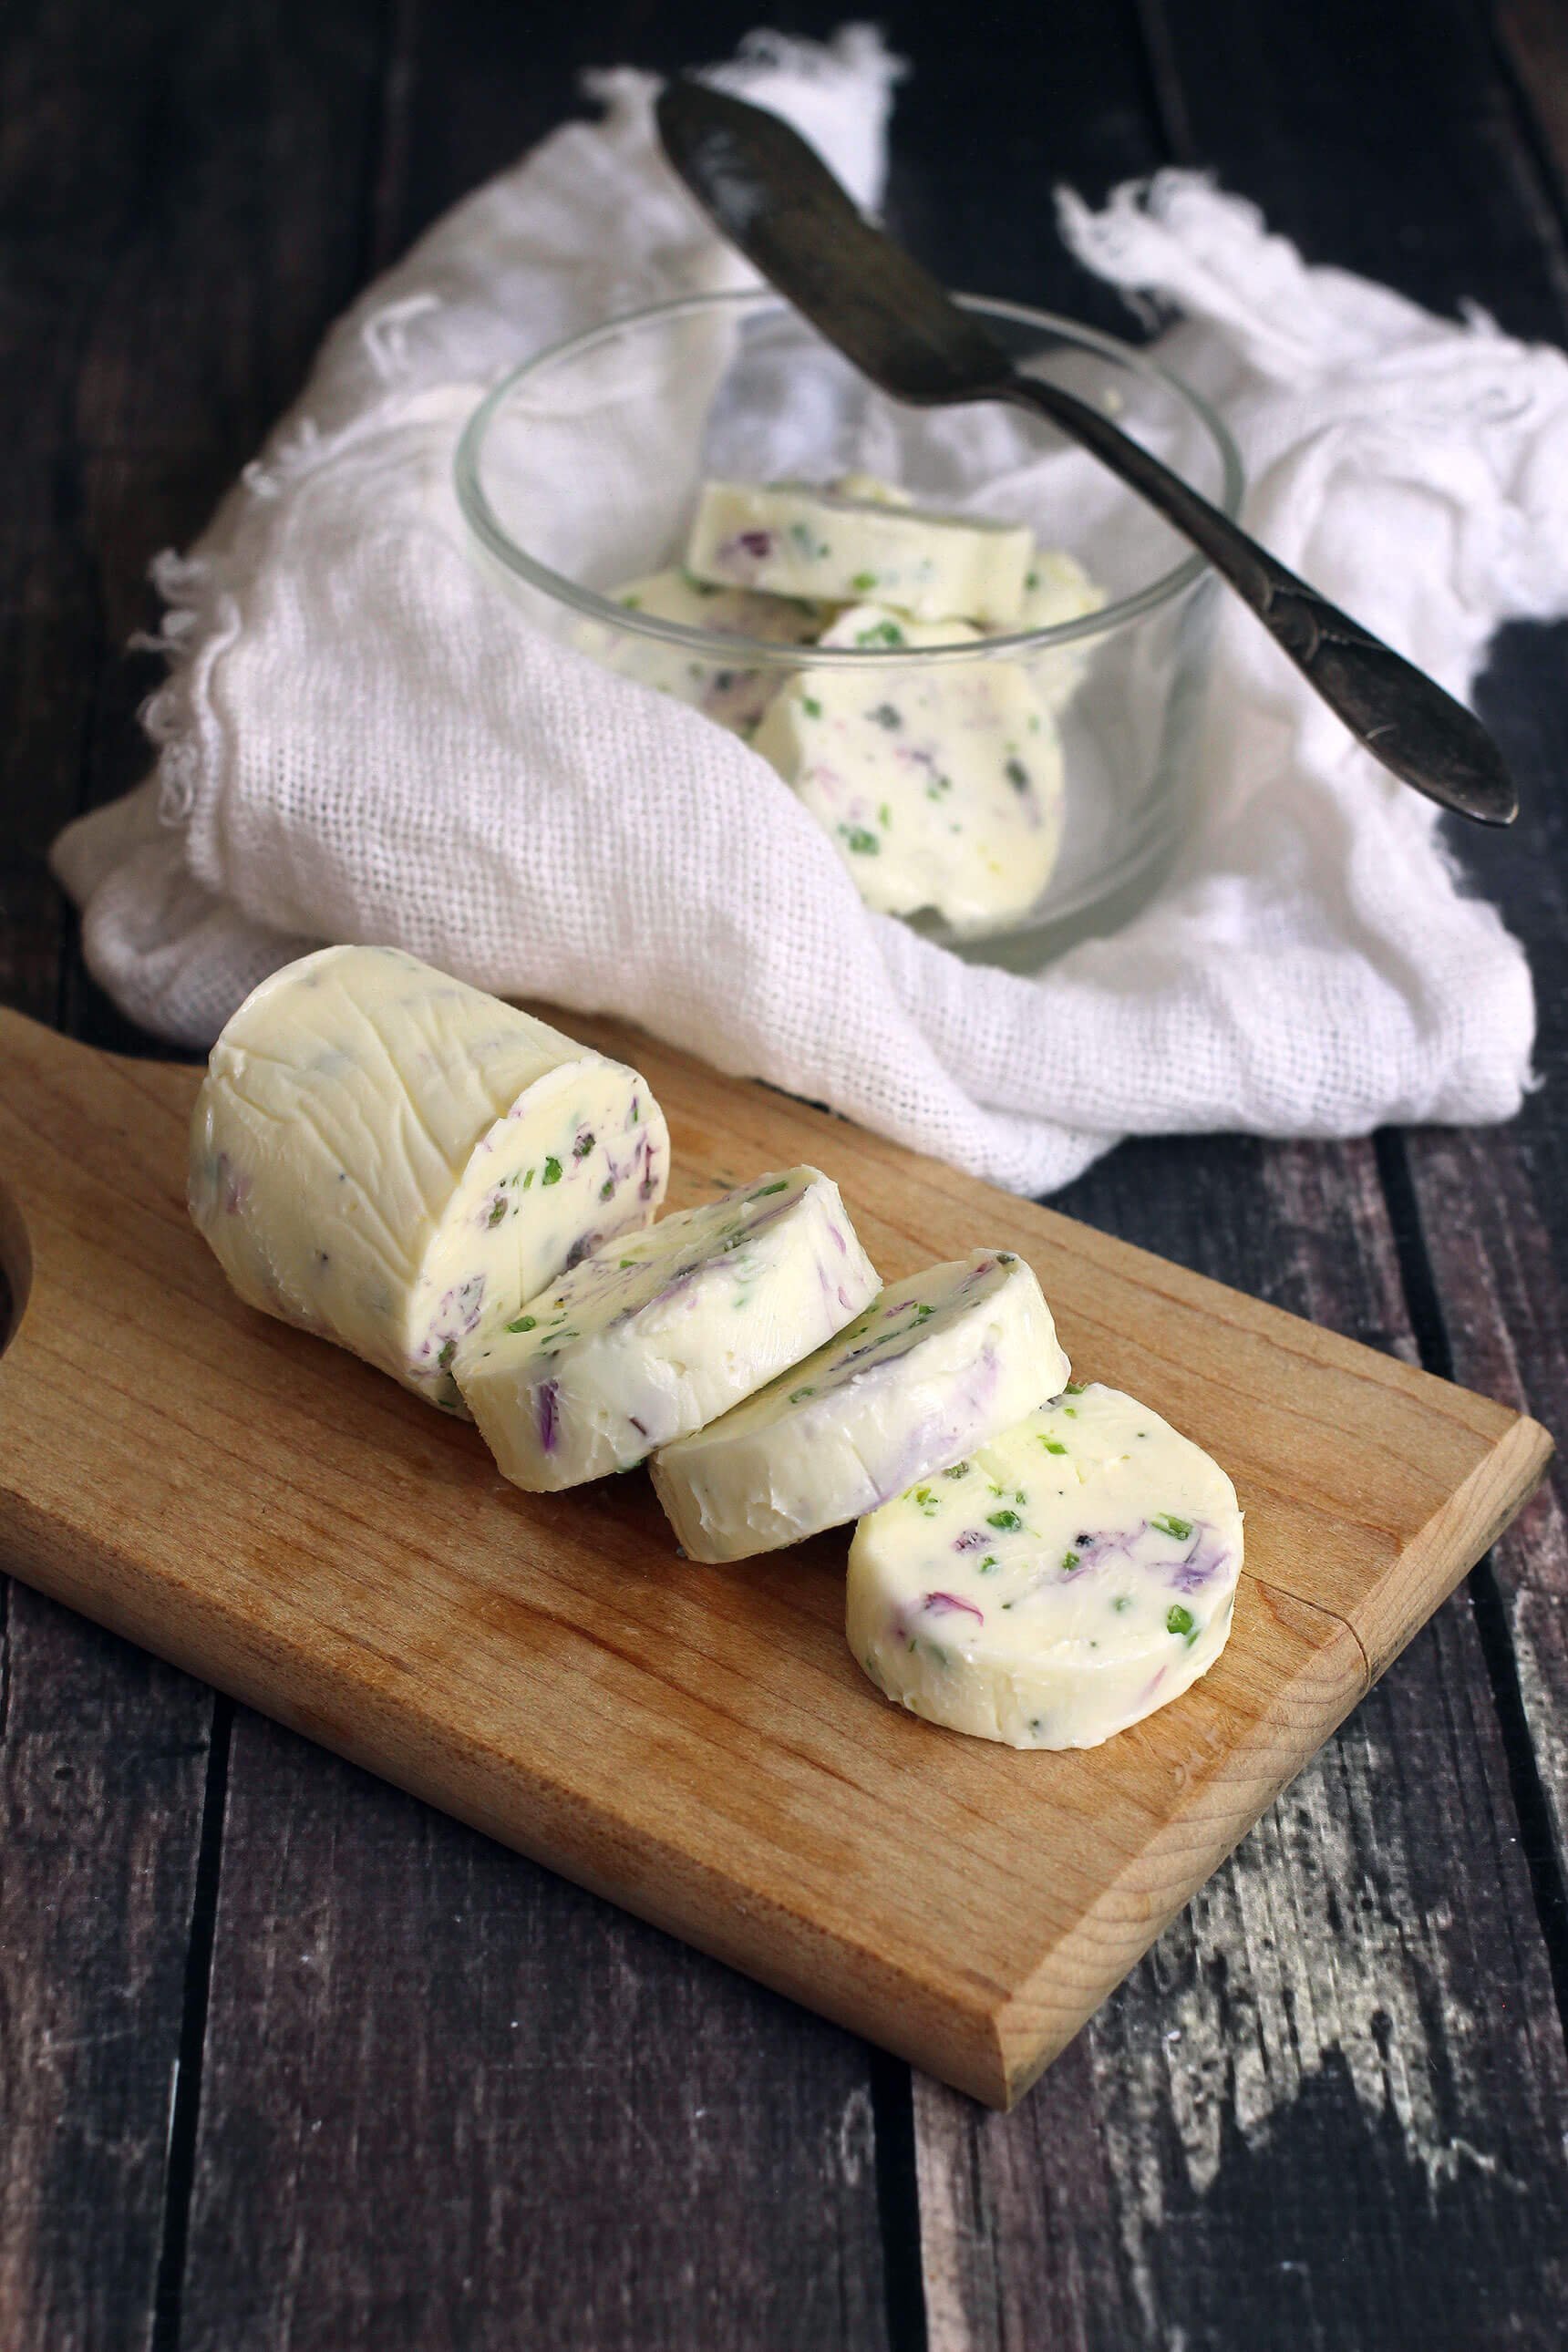 CHIVE FLOWER COMPOUND BUTTER